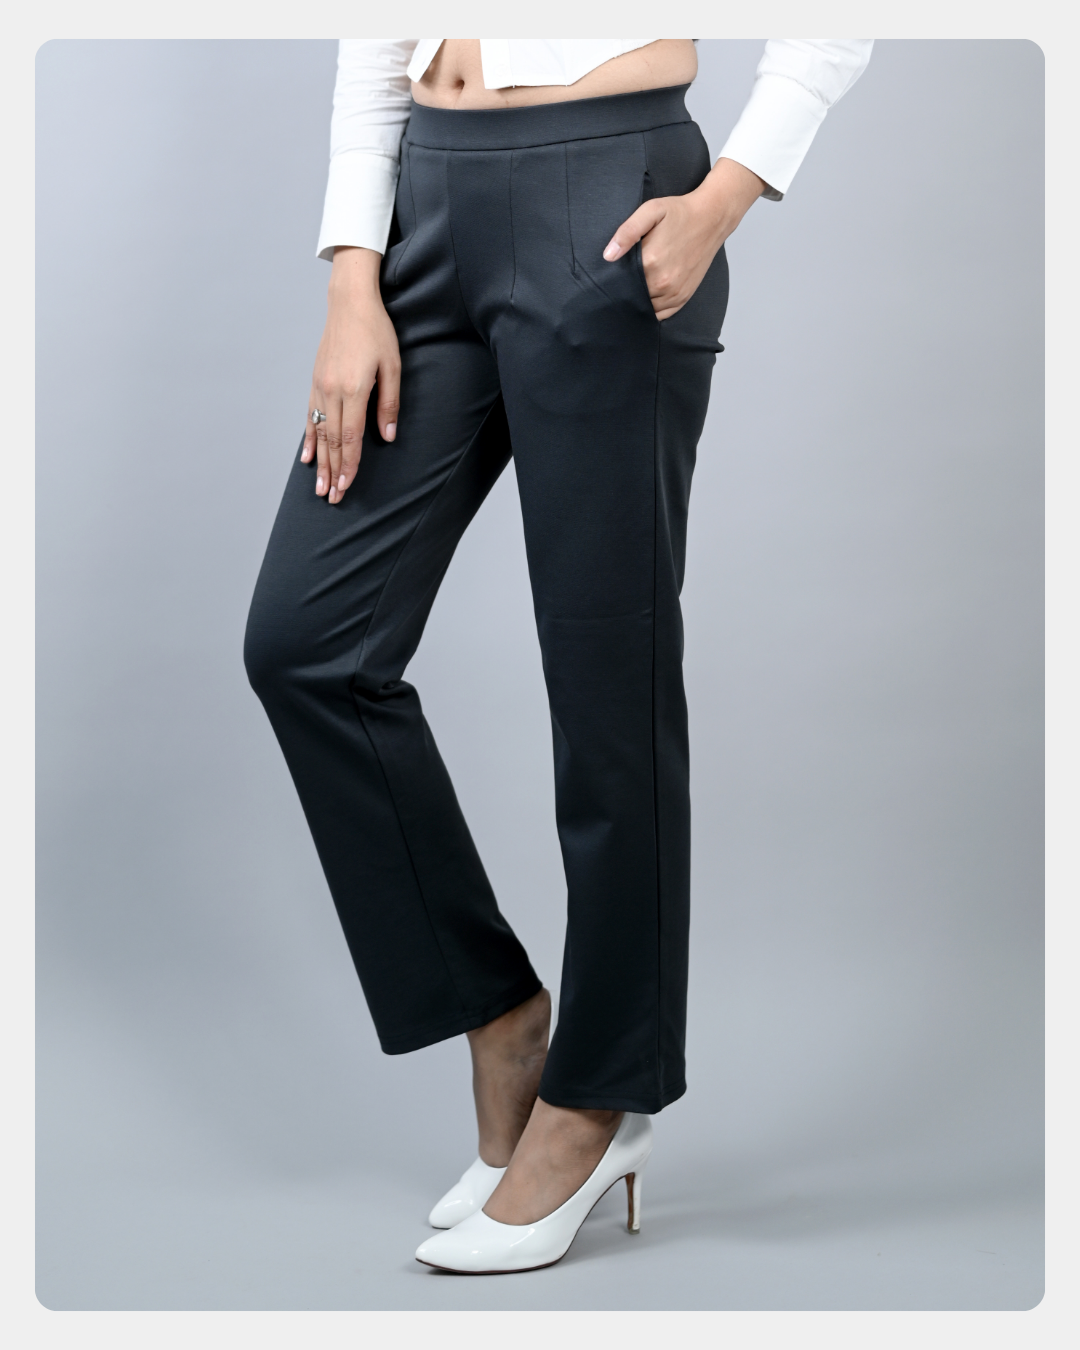 Light pink cigarette pencil pants & trousers for women casual and